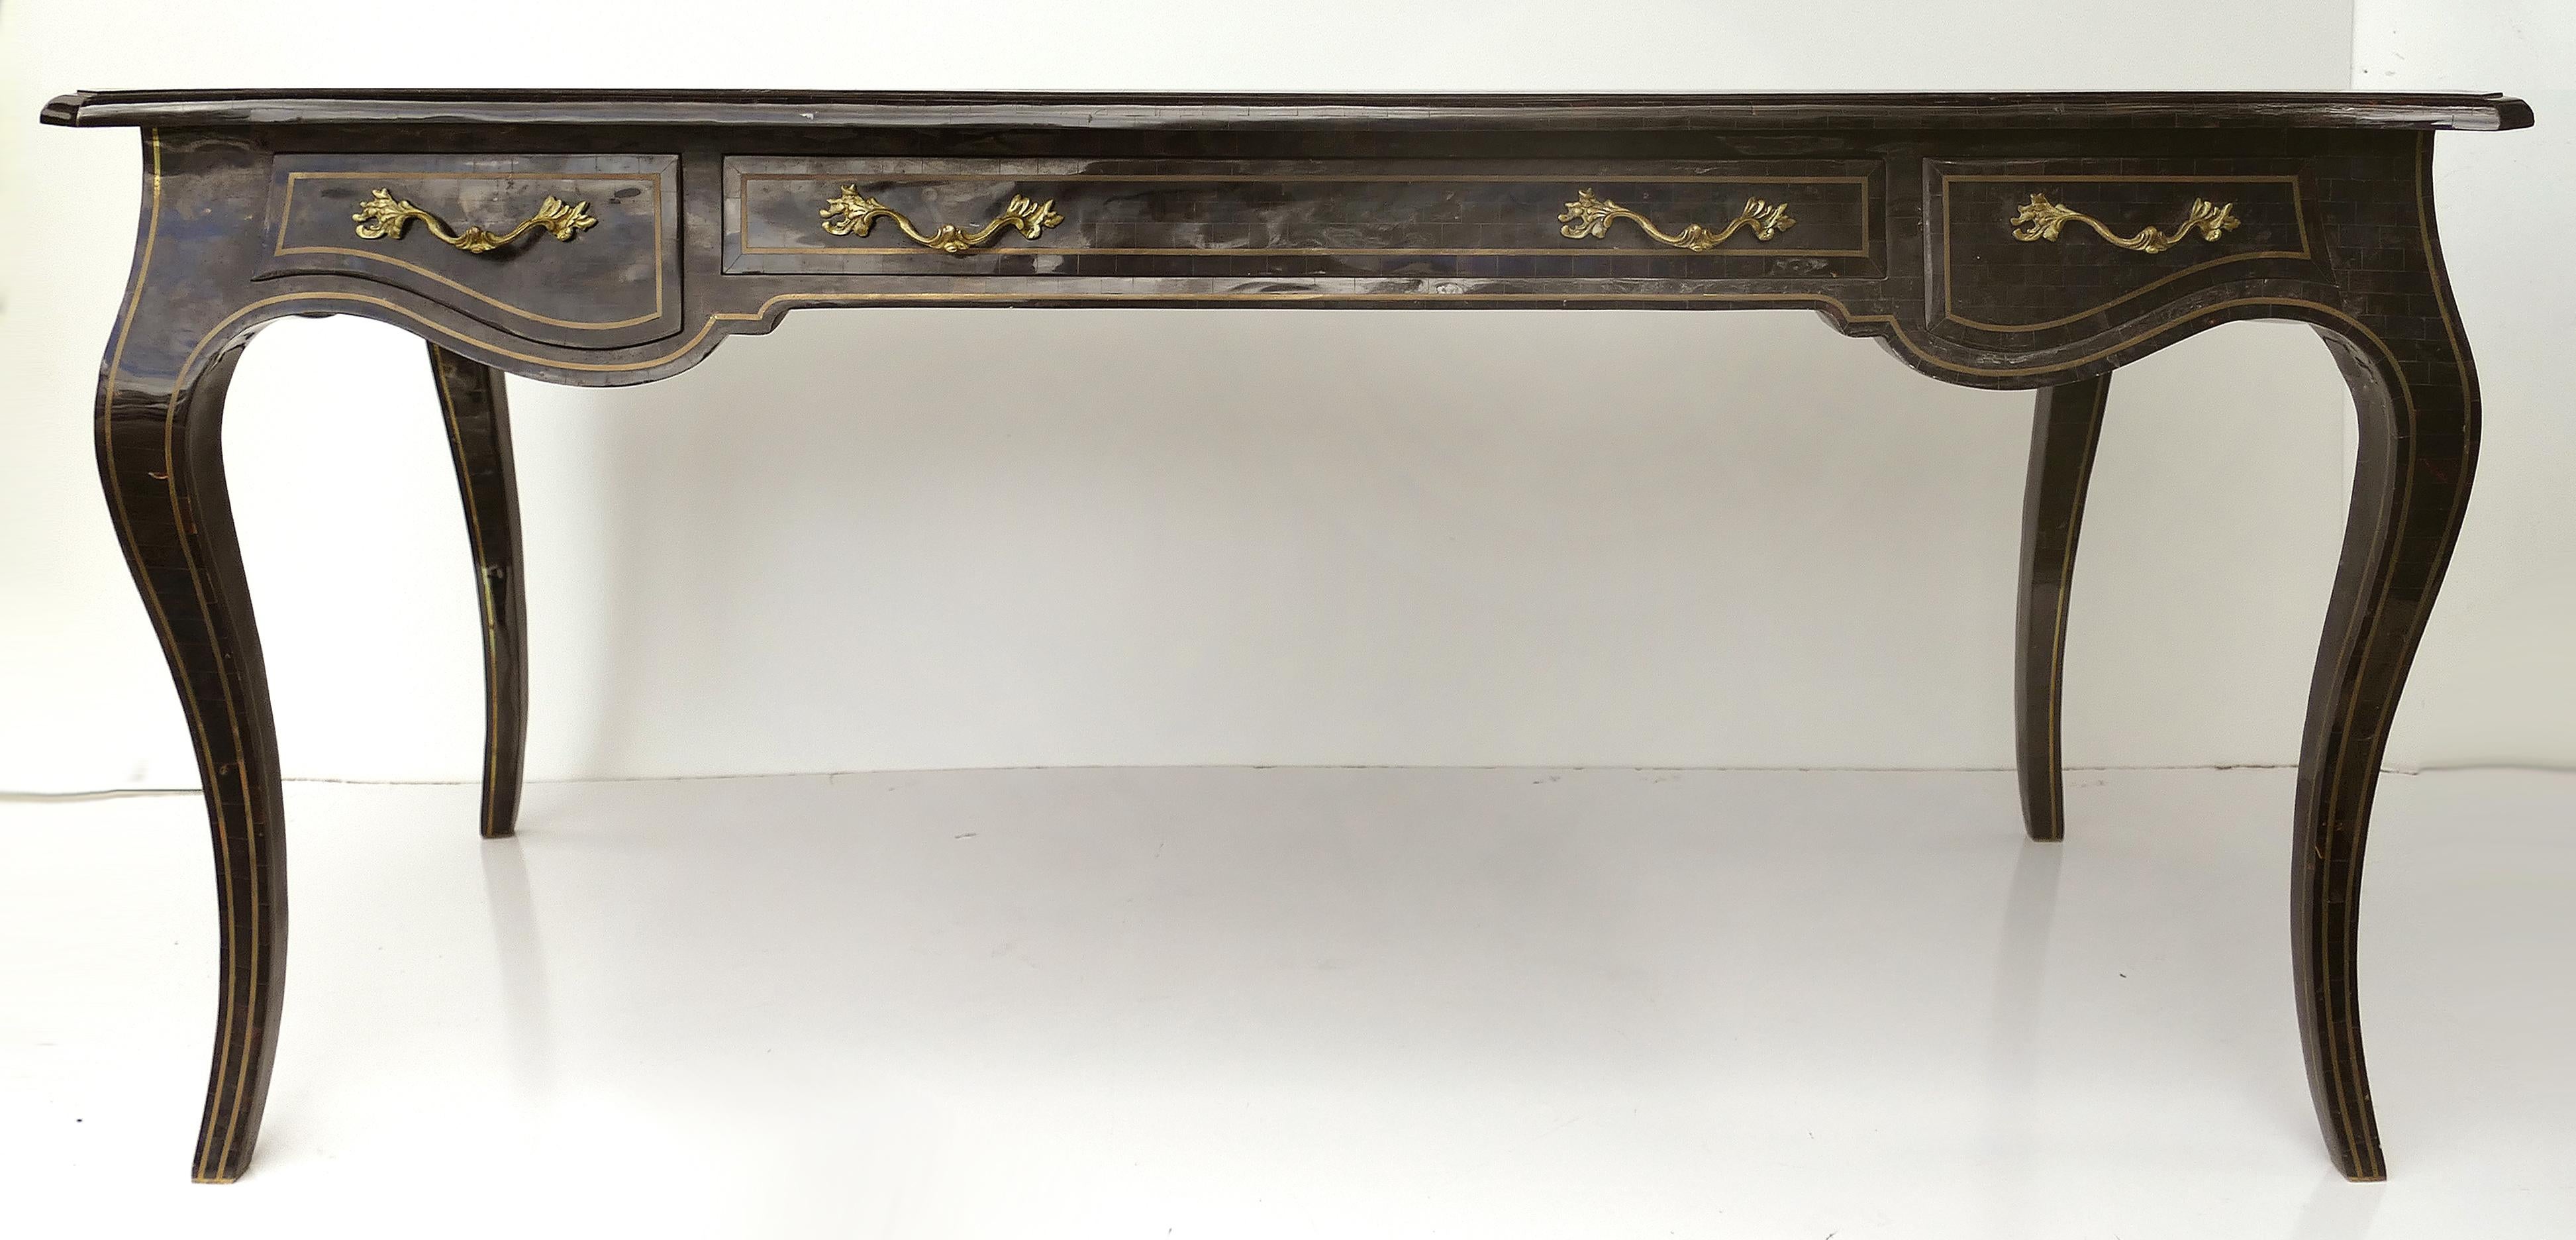 Maitland Smith tessellated horn writing table desk with brass trim

Offered for sale is an elegant 1980s Maitland Smith writing table desk in tessellated Horn and brass. This neoclassically inspired desk is quite large and could be used as a